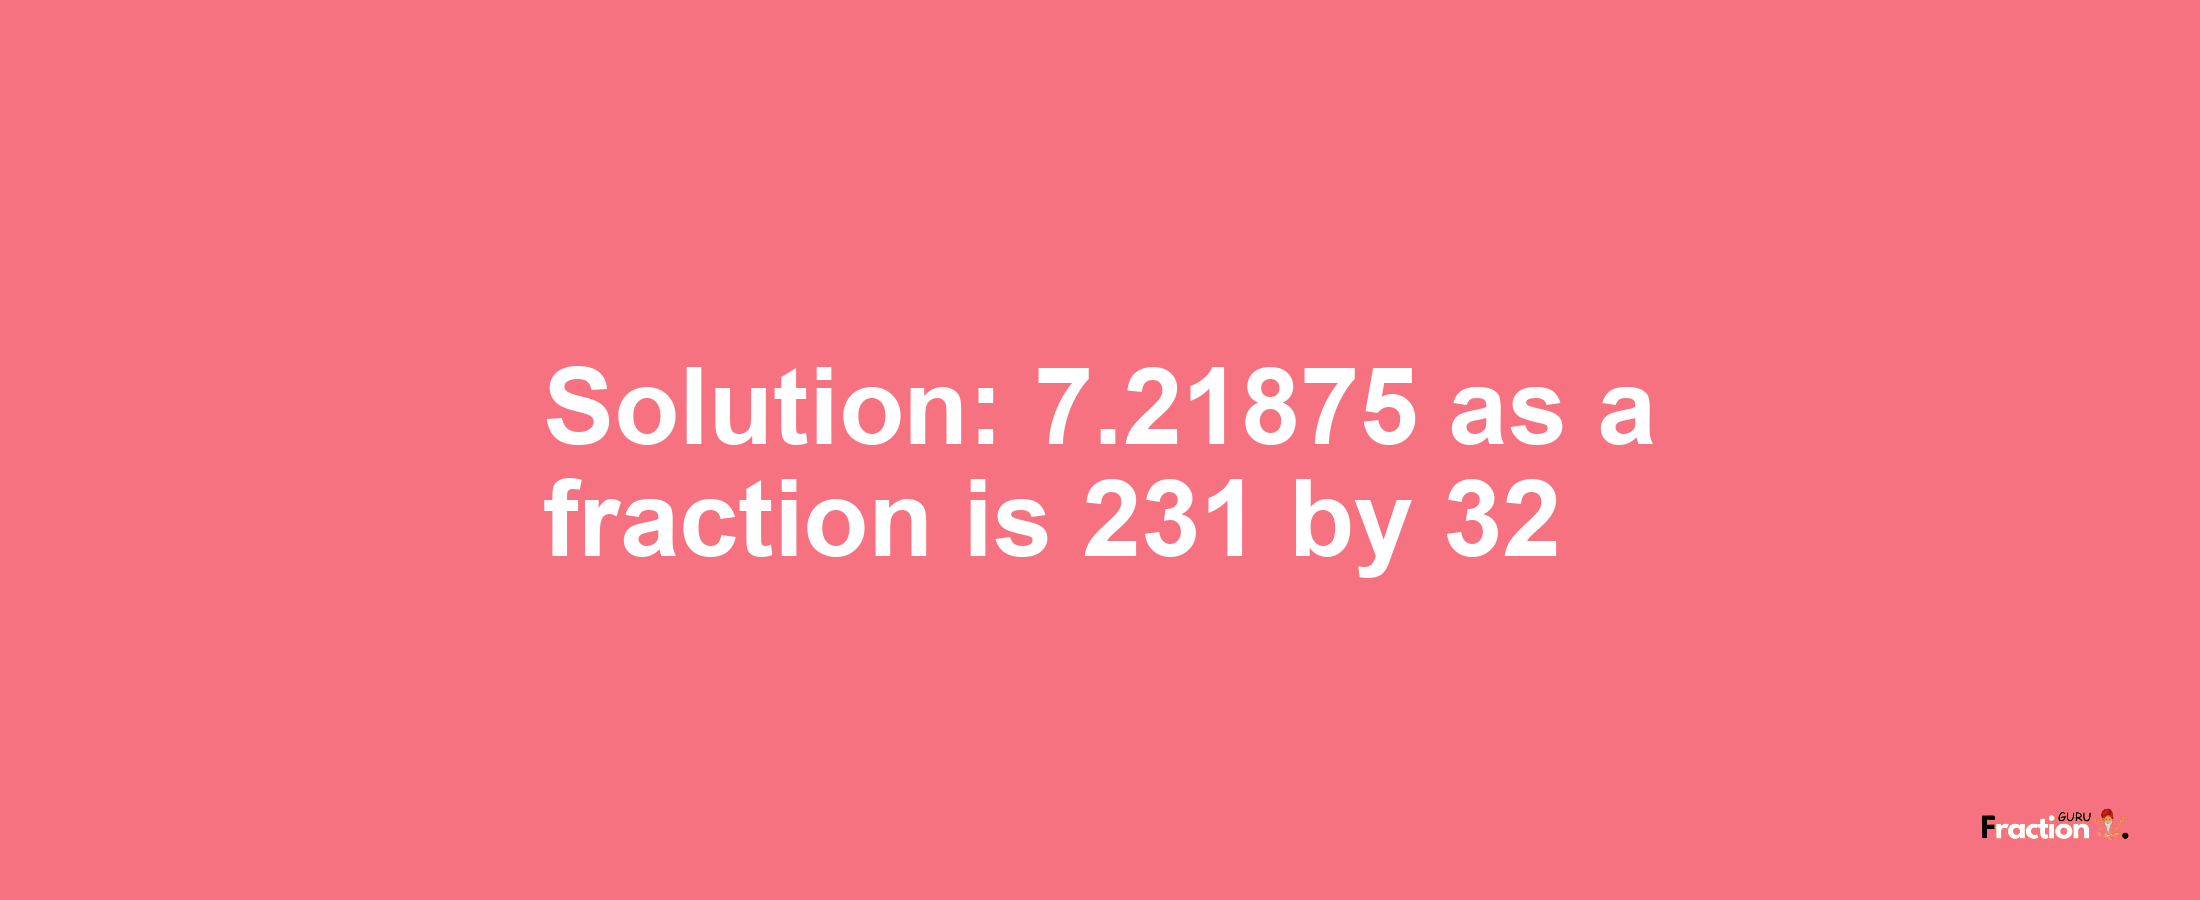 Solution:7.21875 as a fraction is 231/32